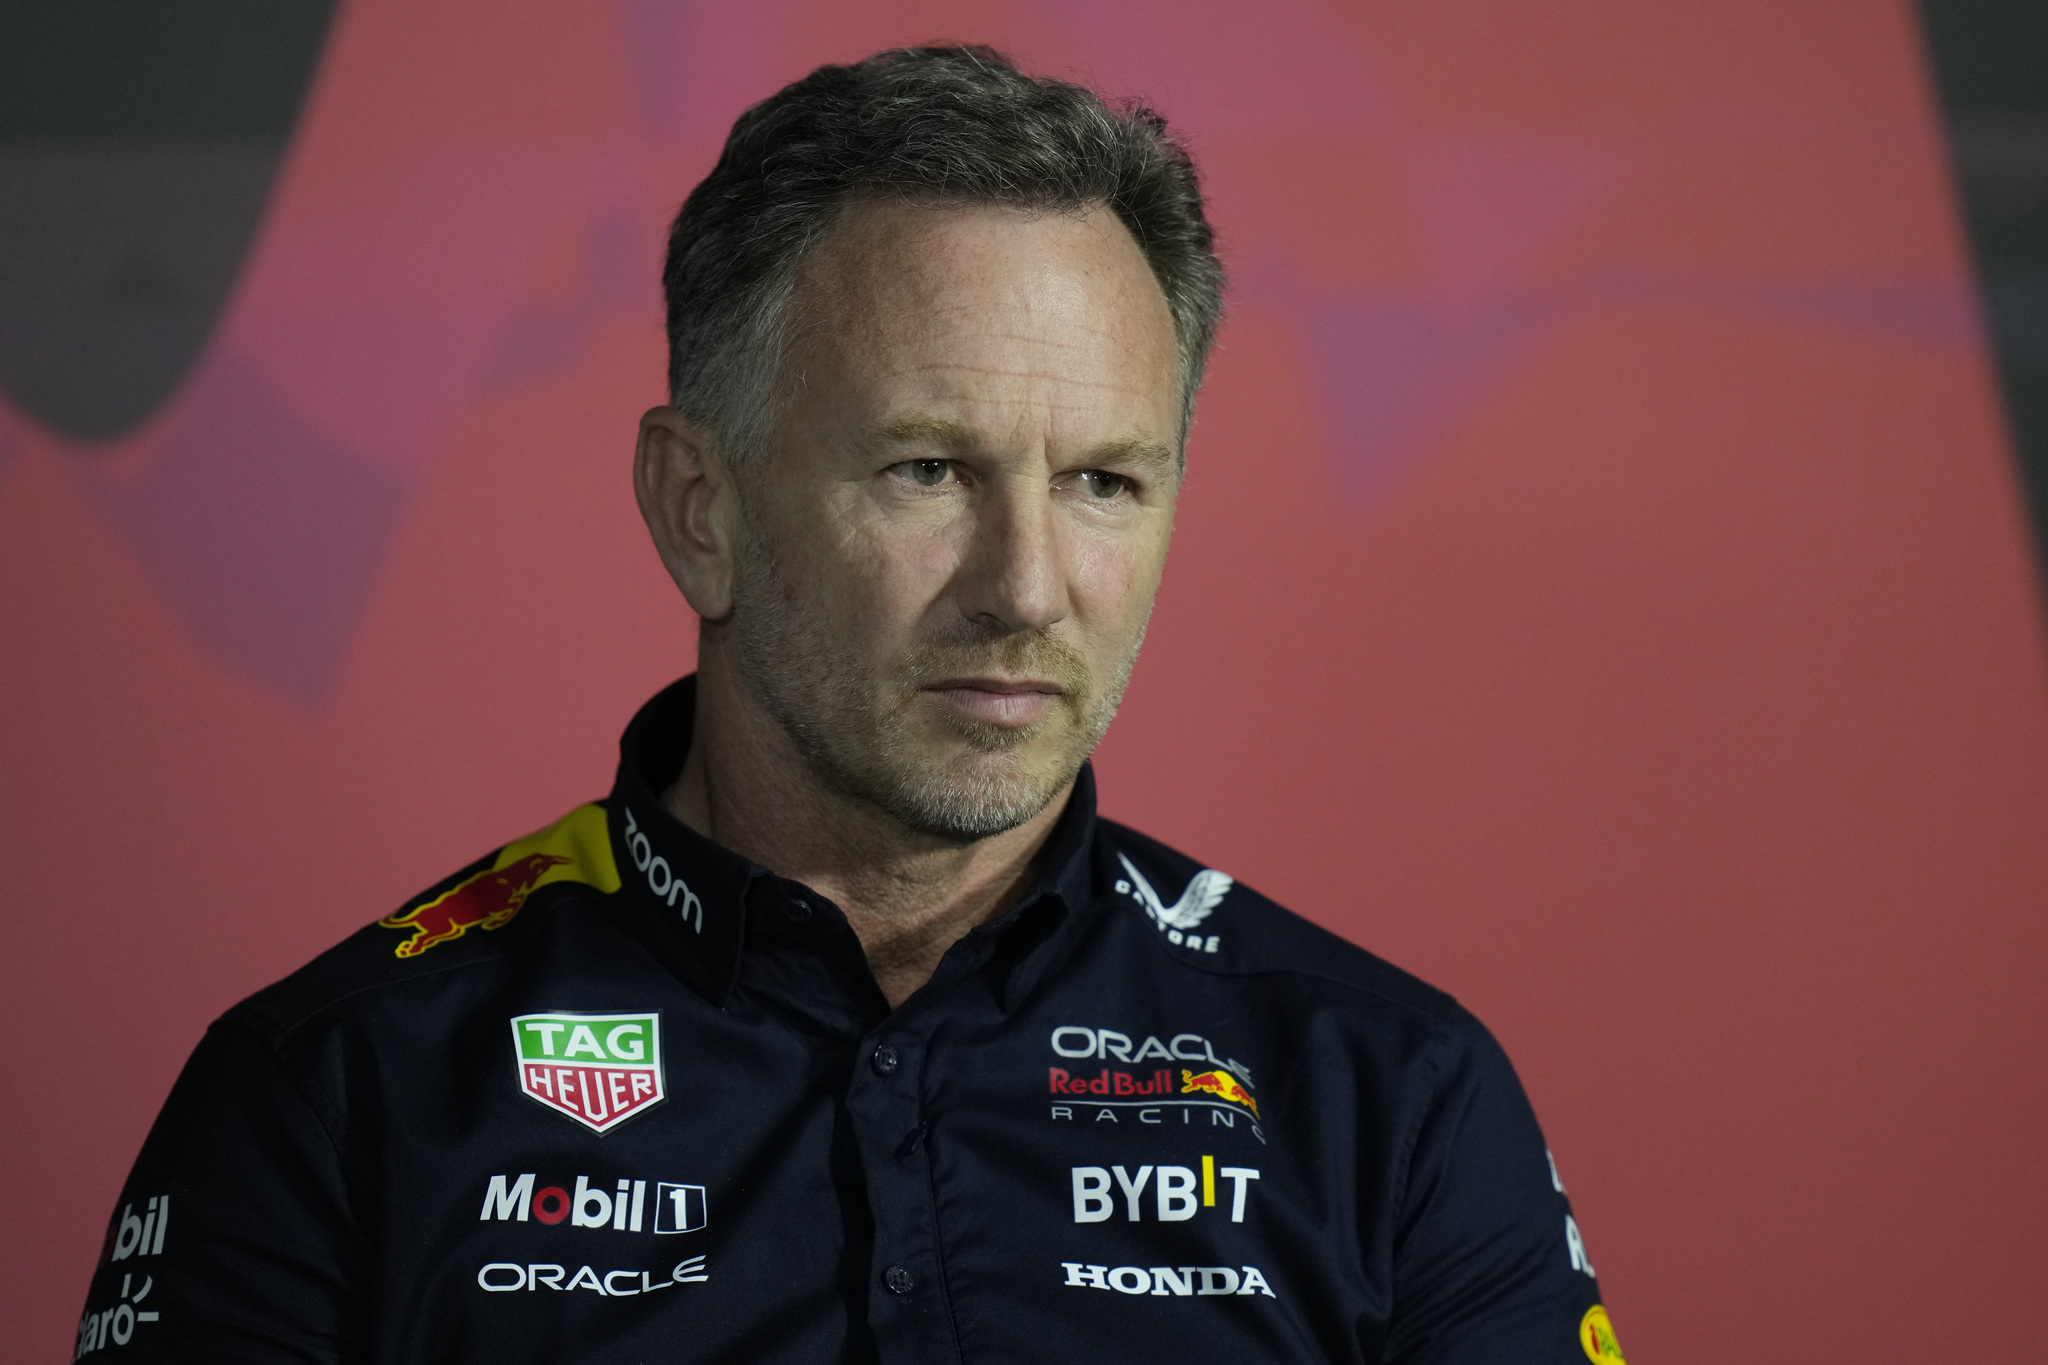 Red Bull team principal Christian Horner listens to a question during a press conference